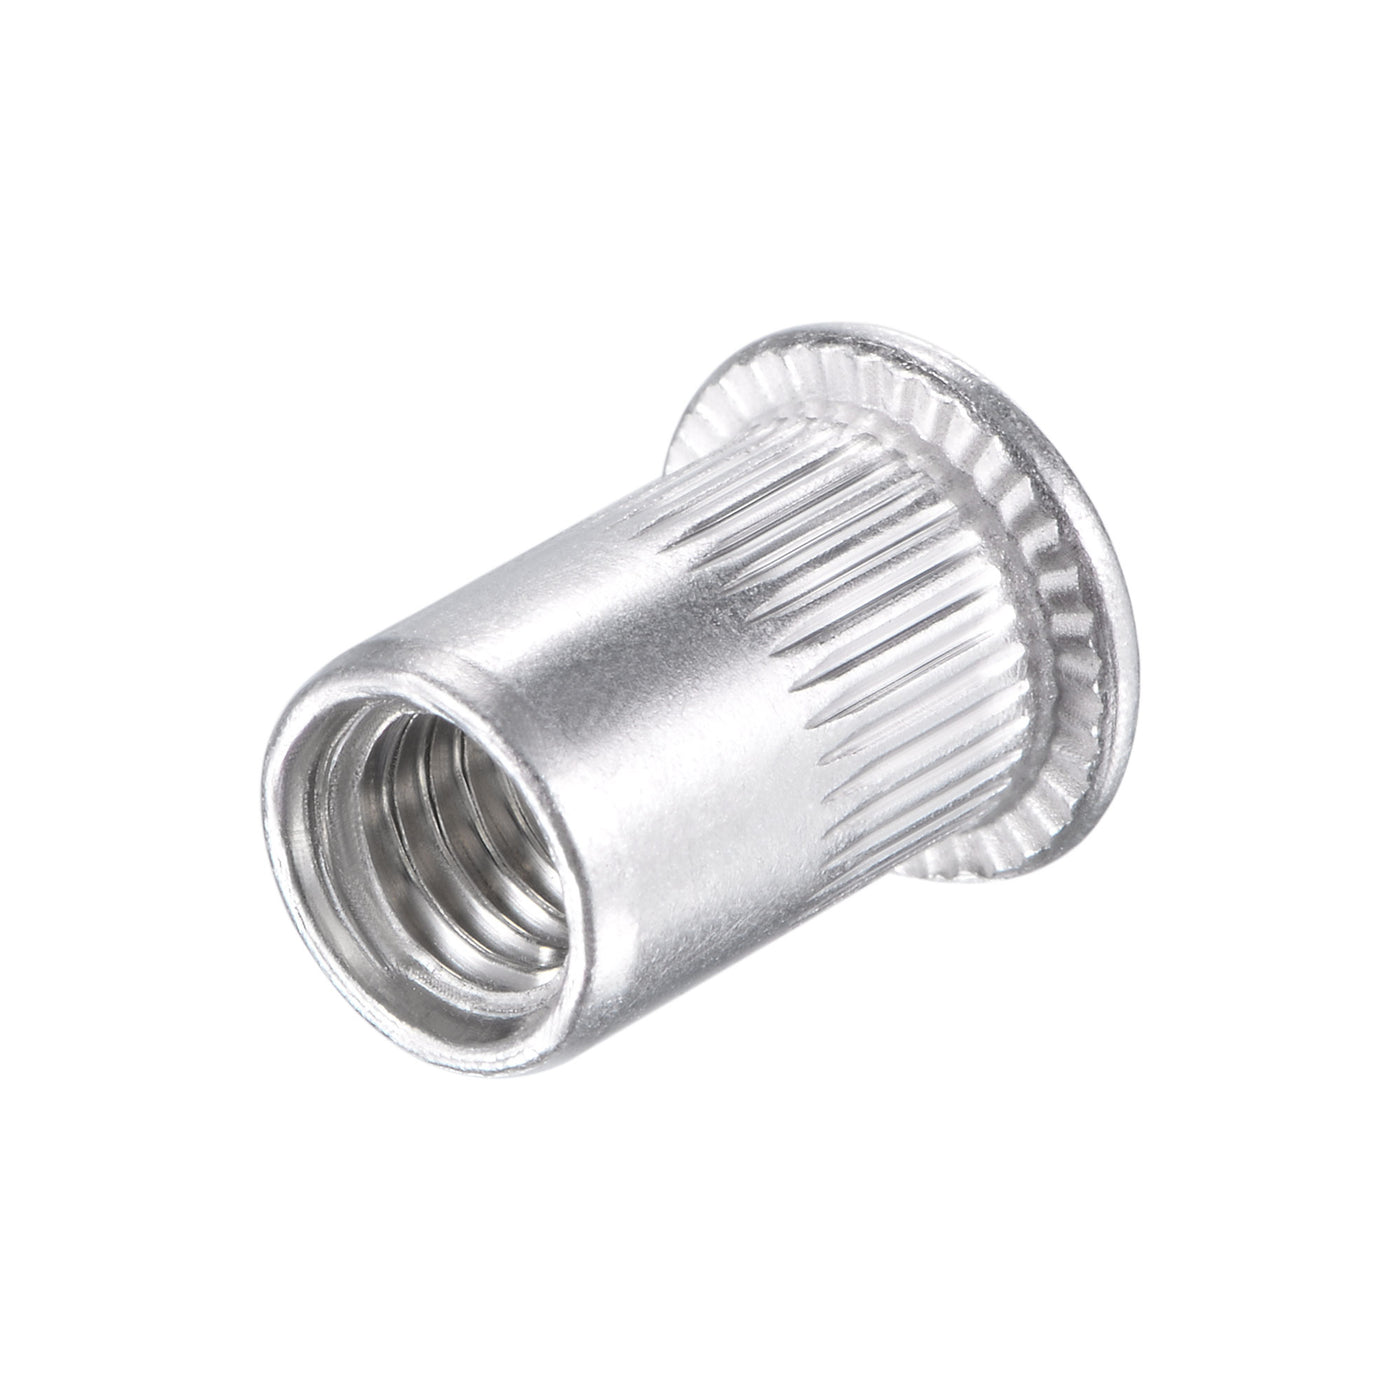 uxcell Uxcell Rivet Nuts Alloy Knurled Flat Head Threaded Insert